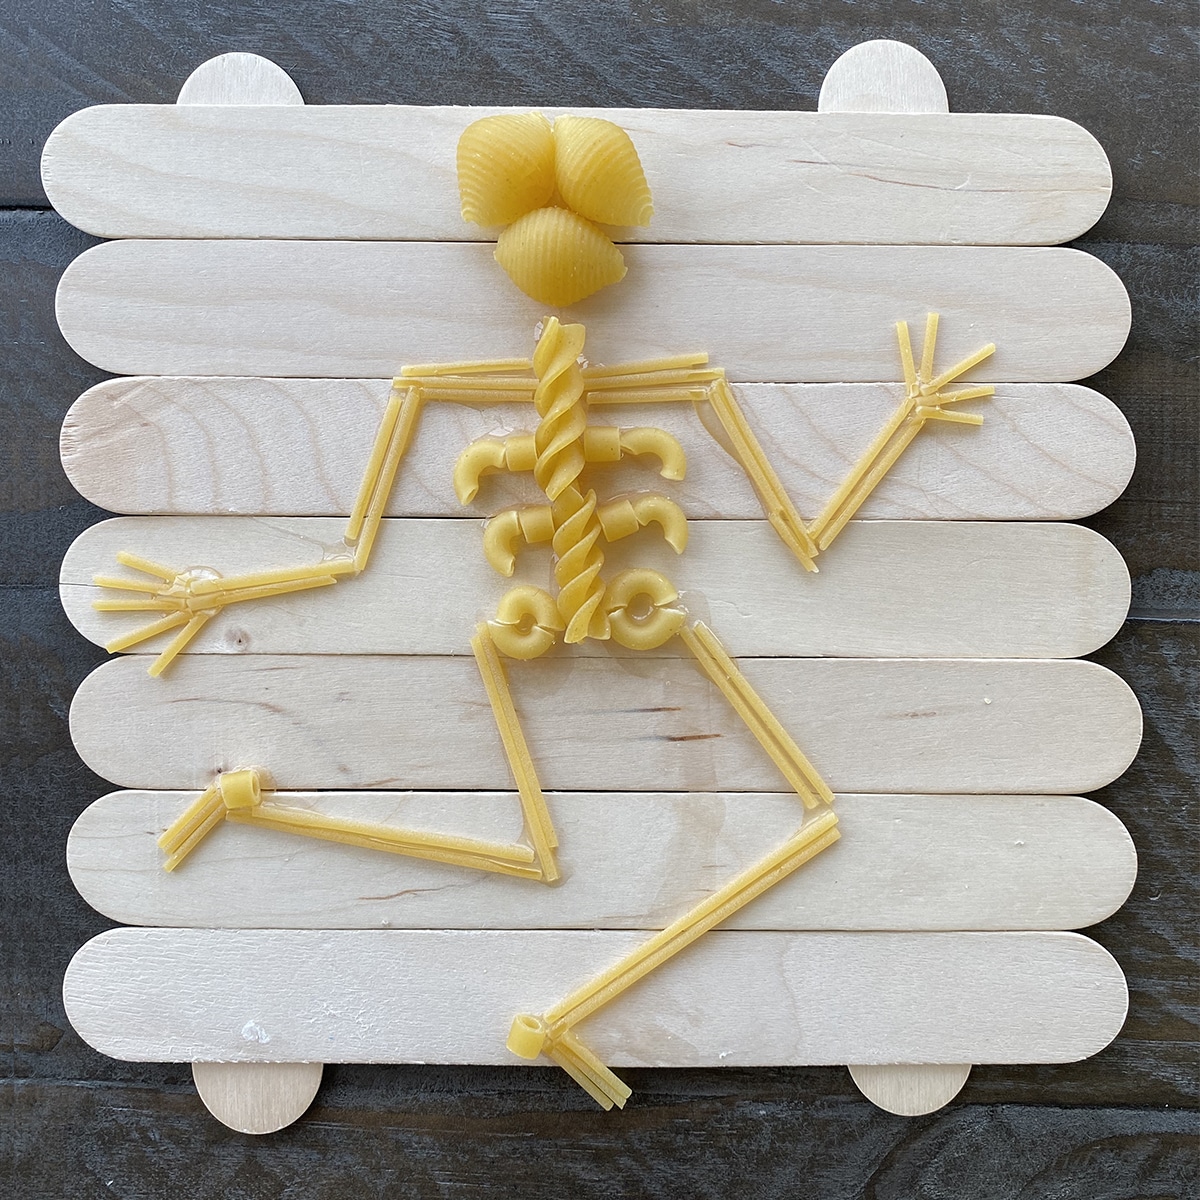 Halloween Crafts for Kids: How to Make a Pasta Skeleton